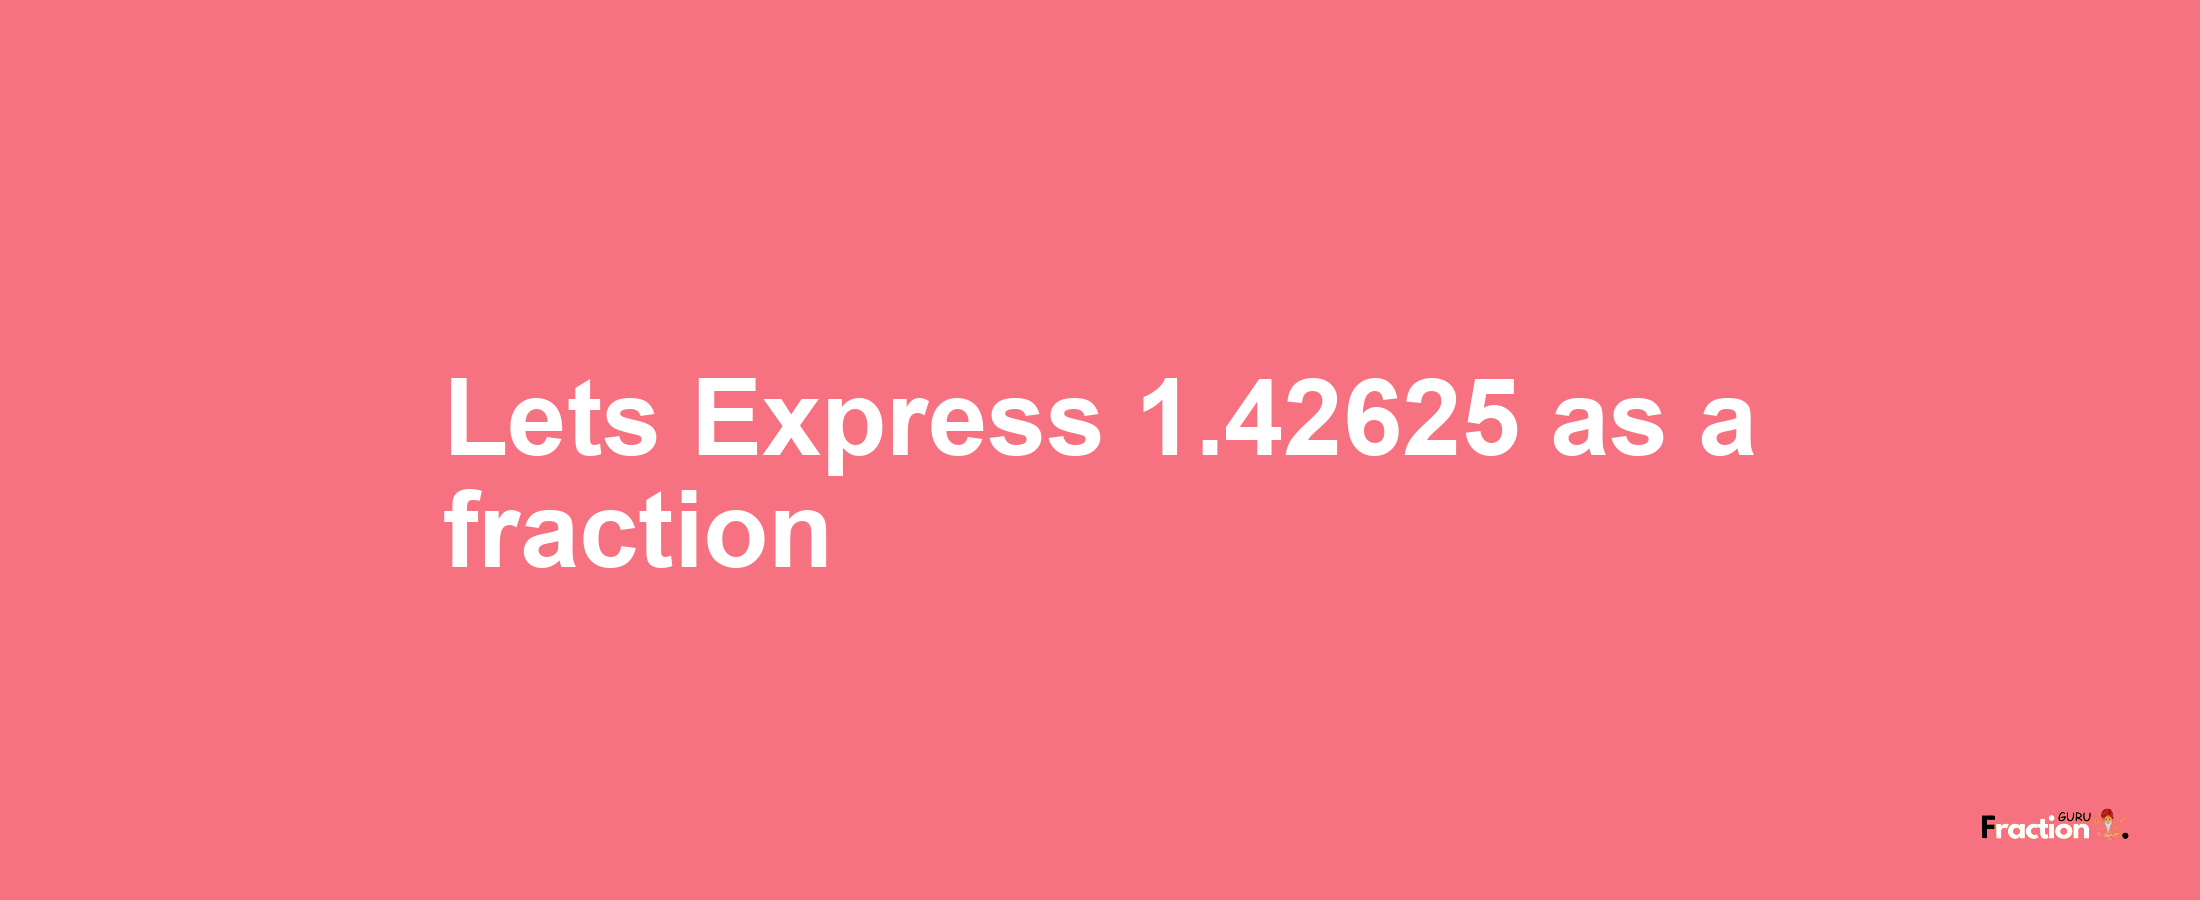 Lets Express 1.42625 as afraction